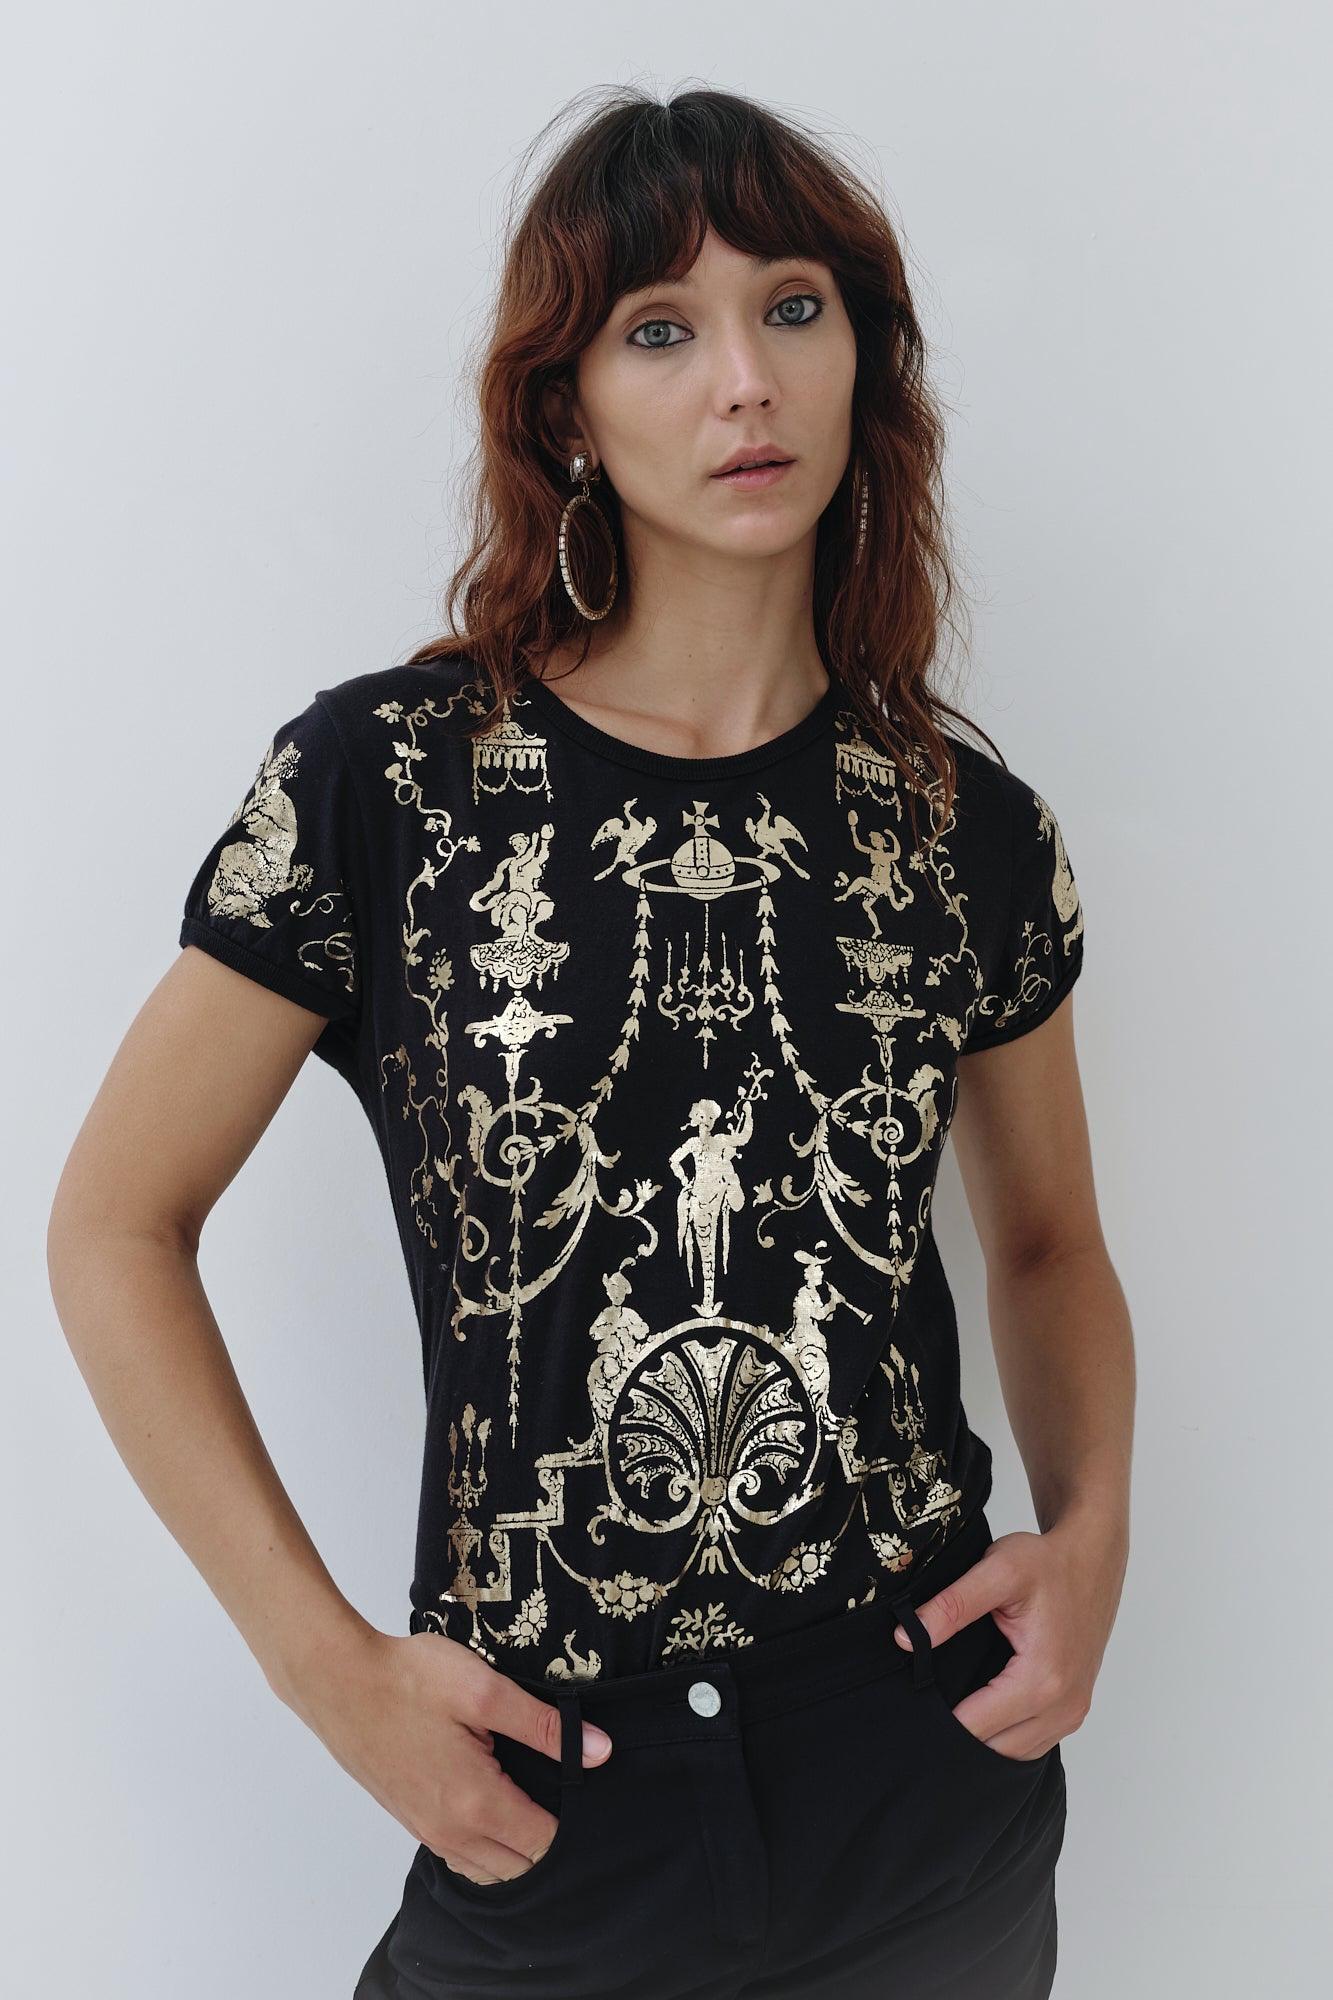 Made in England, this Vivienne Westwood t-shirt dates to the F/W 1990 Portrait collection & features a gold metallic Boulle print on the front & the back. A highly collectible & instantly recognisable Westwood piece, this was likely orginally